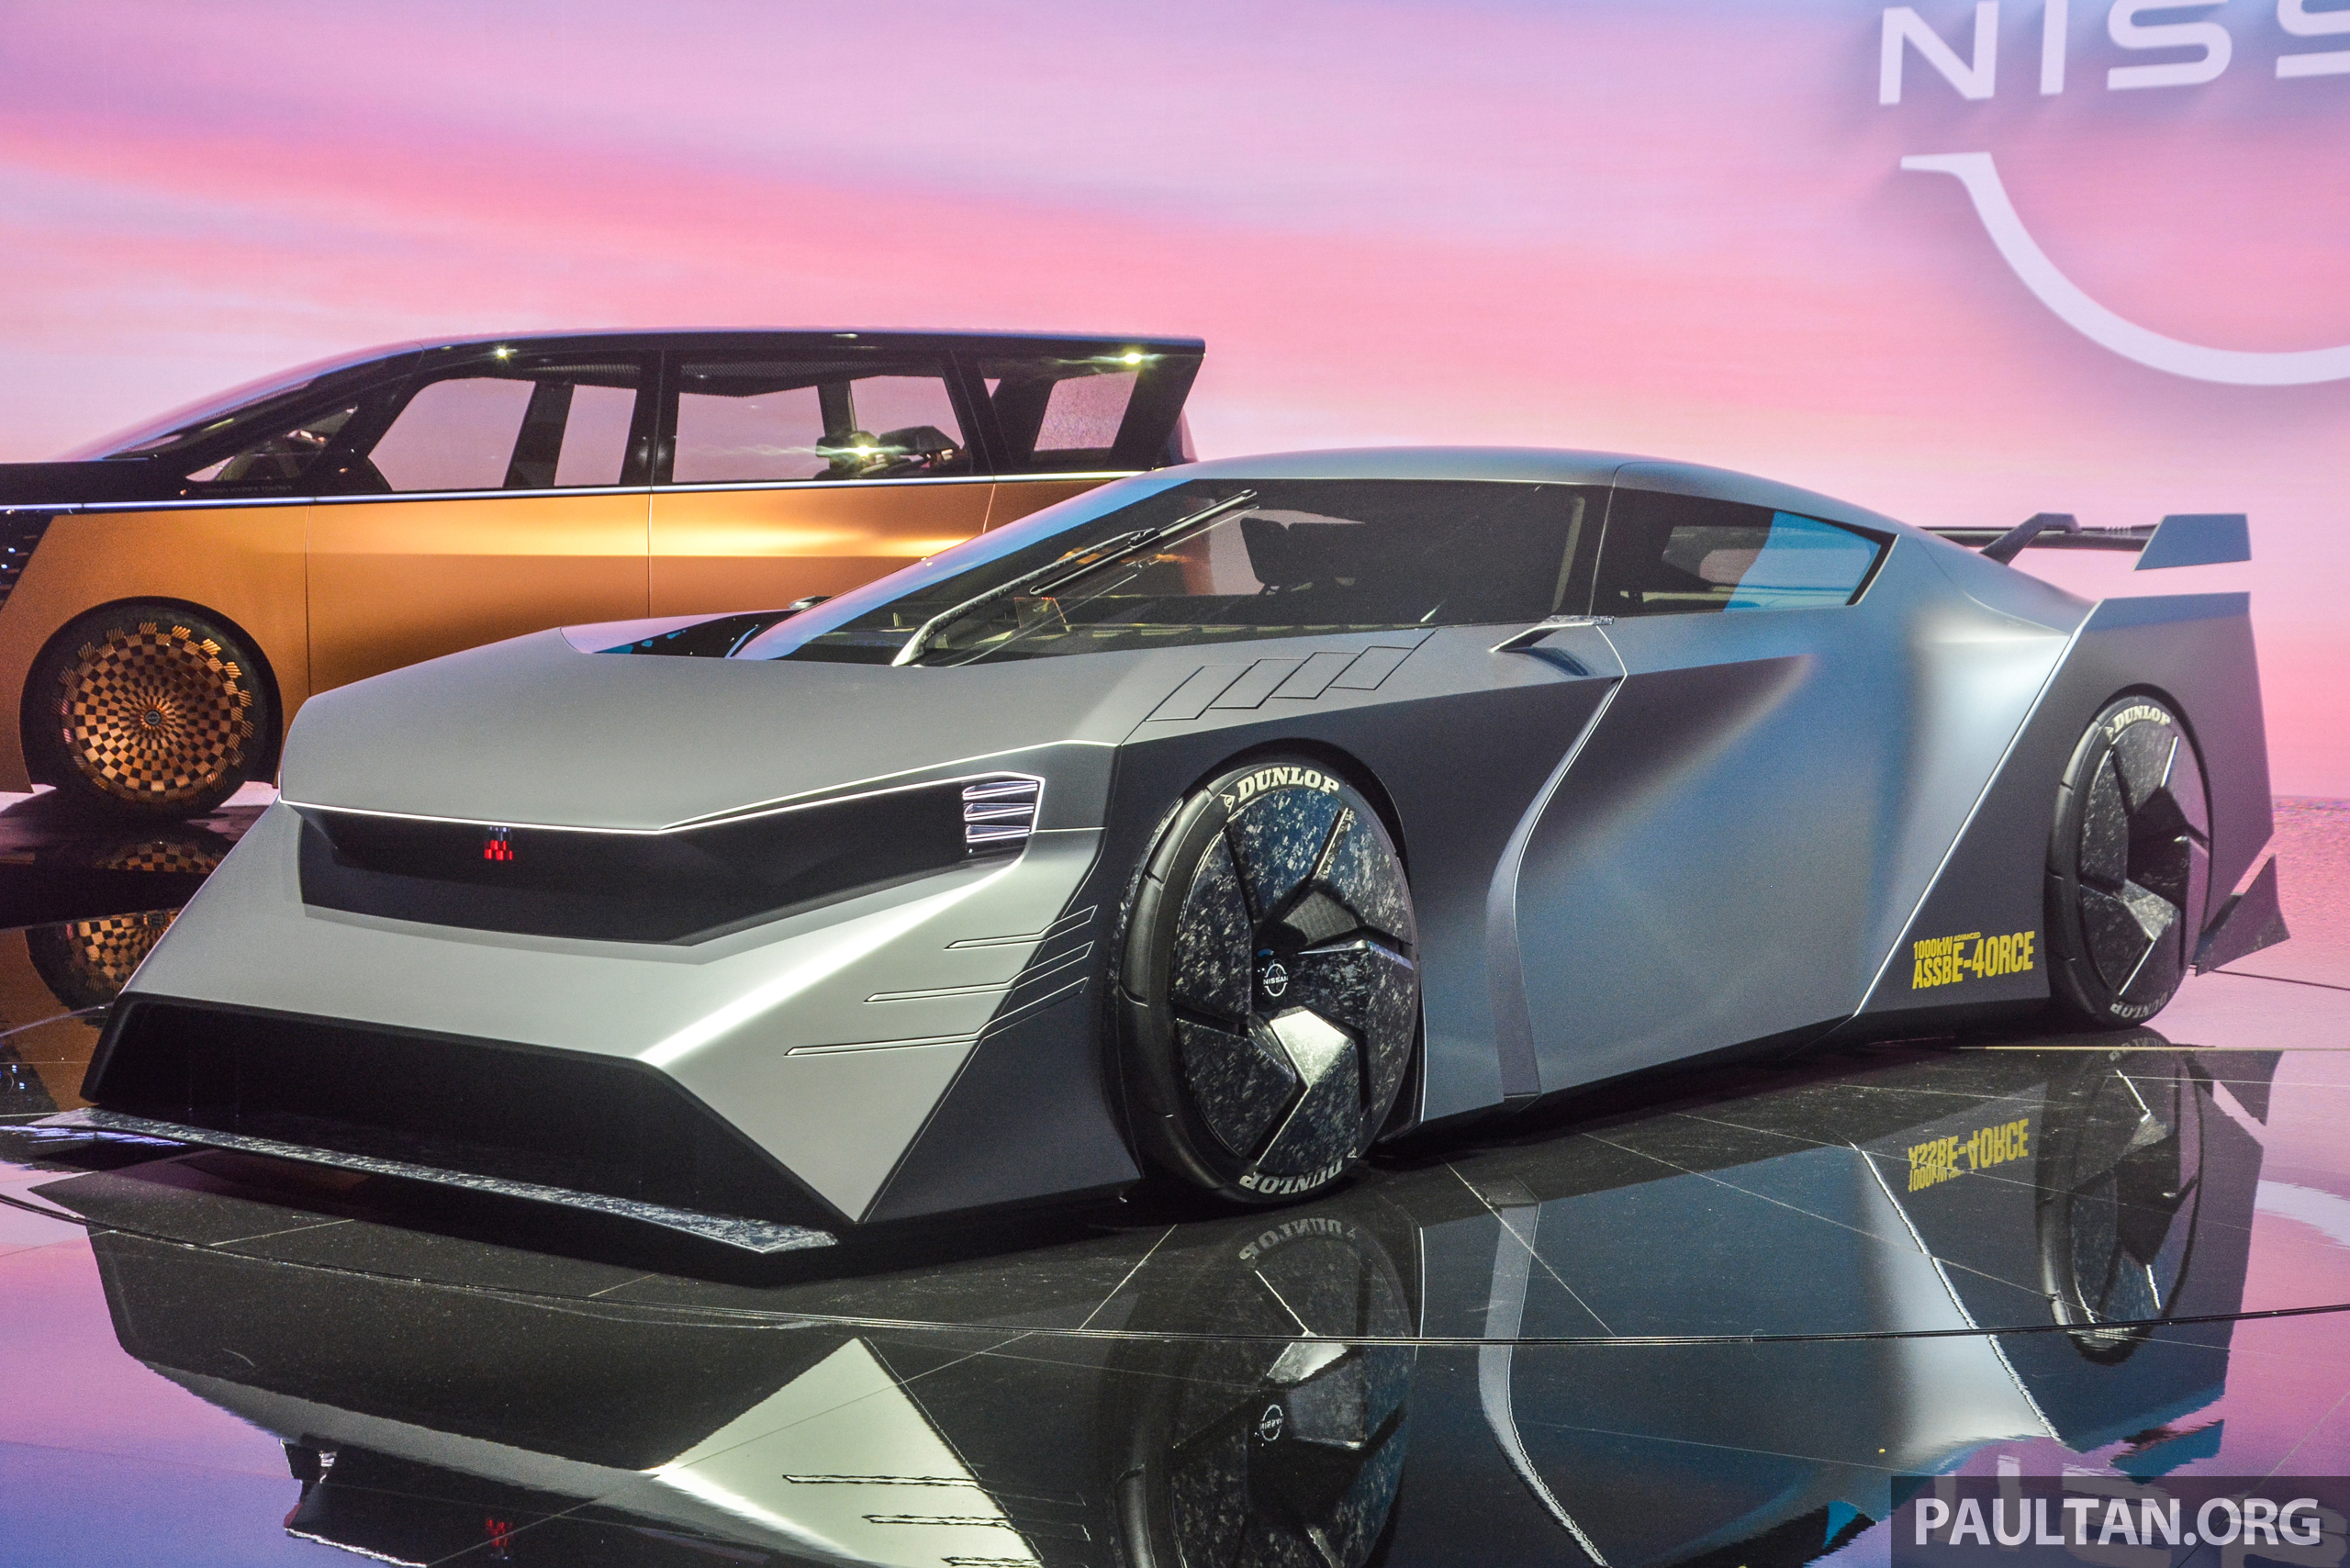 Nissan Hyper Force concept is our first taste of the R36 GT-R